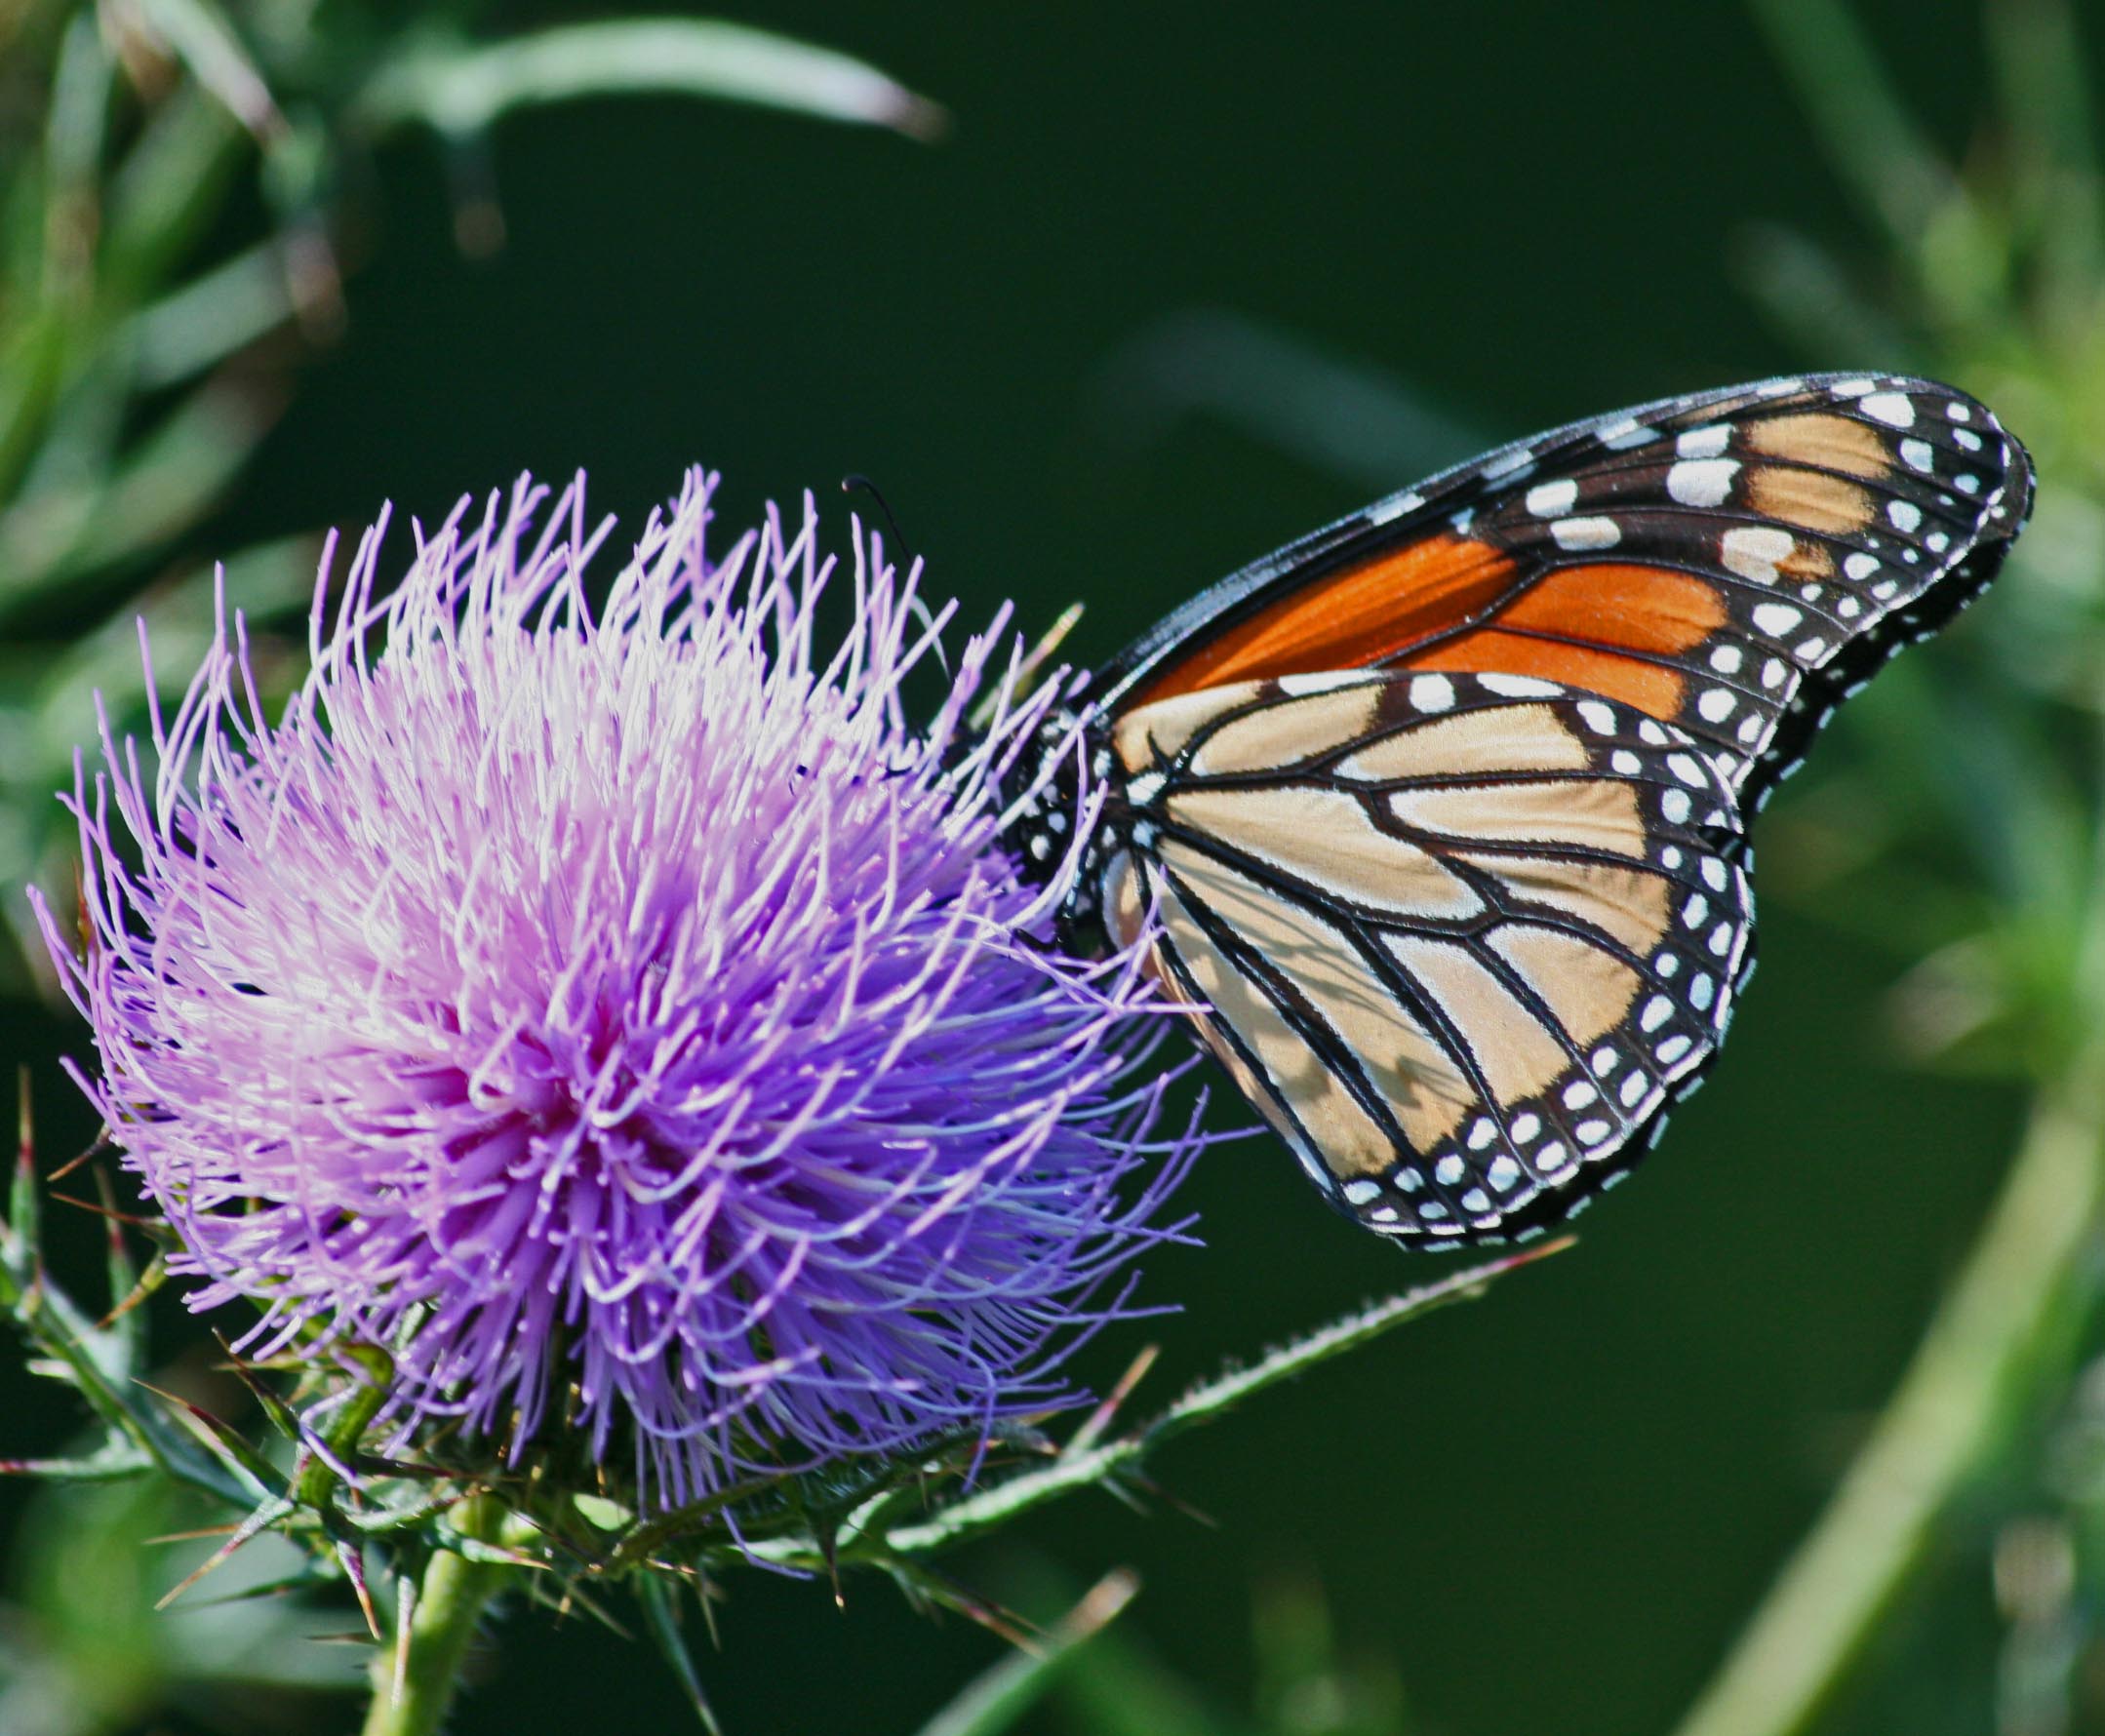 Sunlit Monarch Butterfly Buried in Pasture Thistle Flower tb0812tbr.jpg